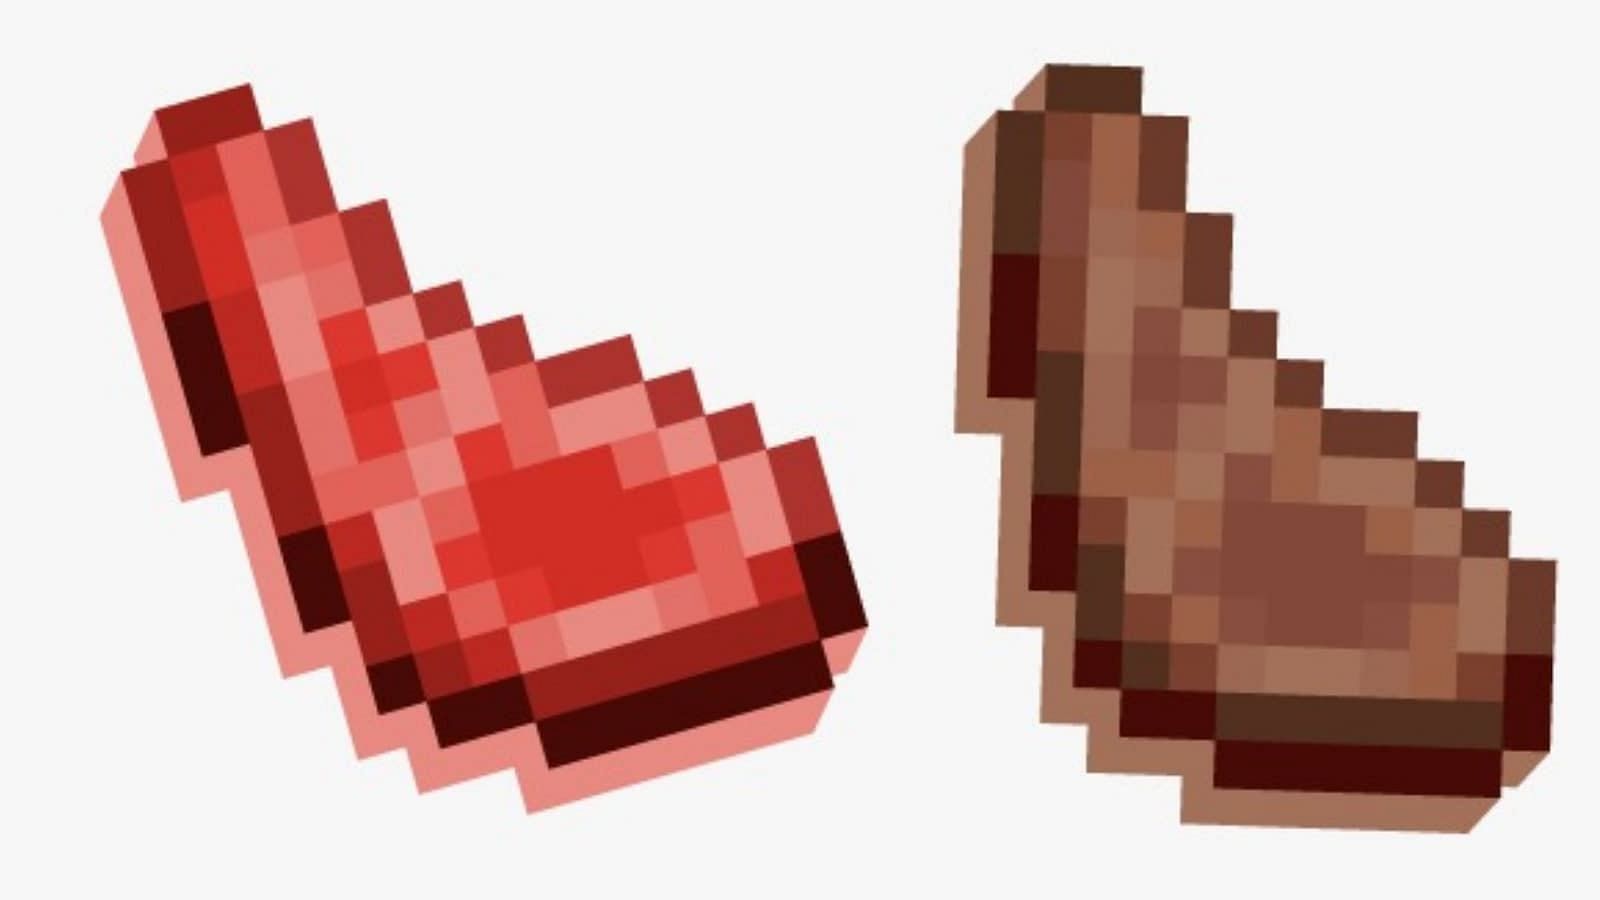 Raw mutton compared to its cooked counterpart (Image via Mojang)